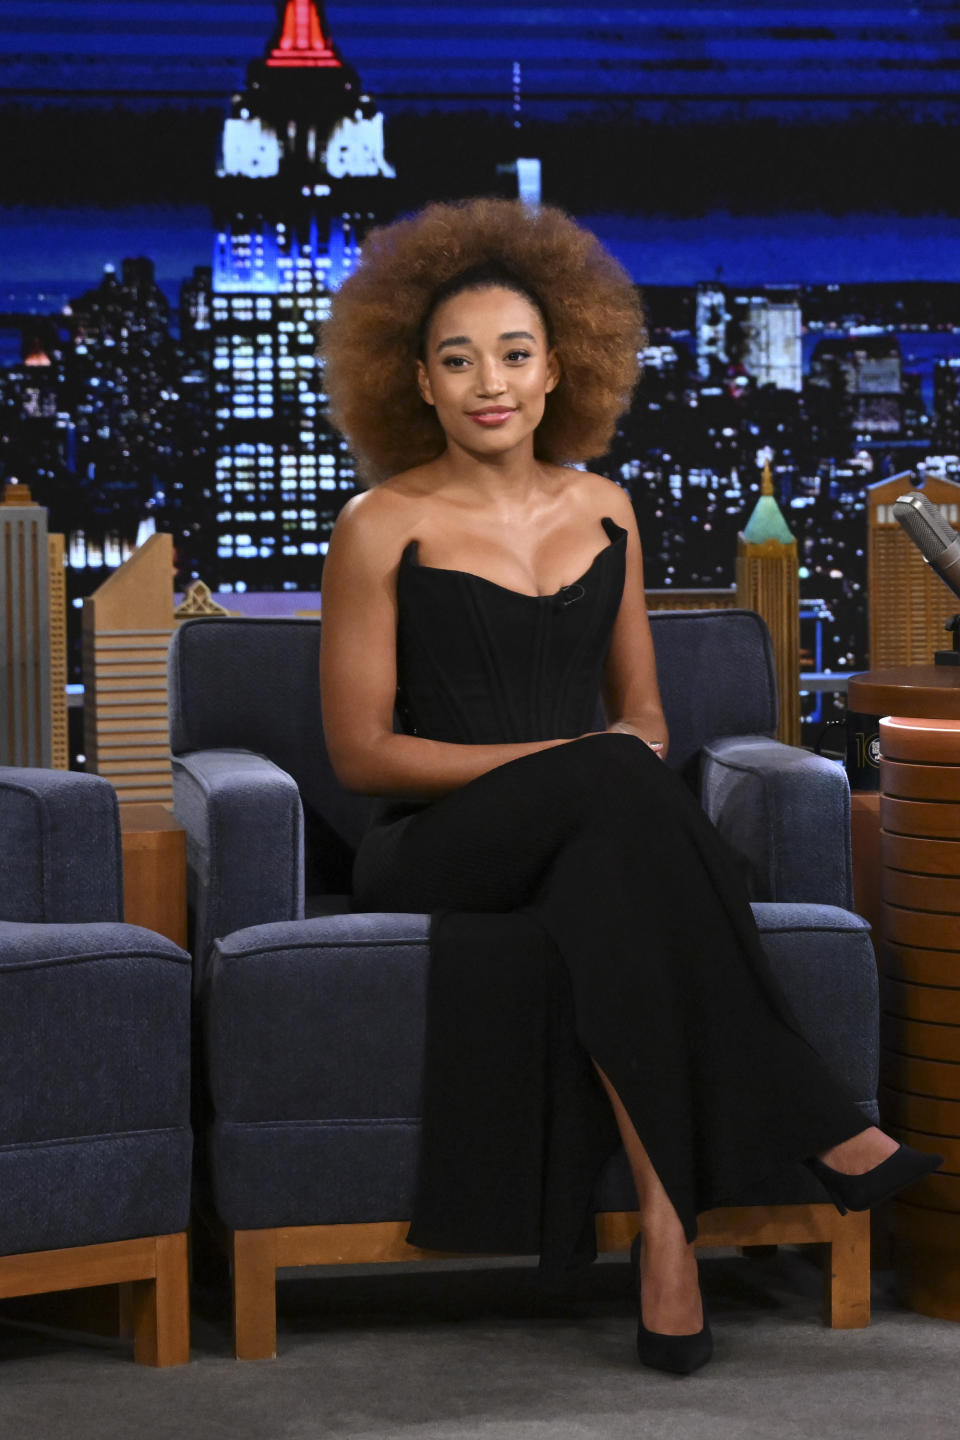 Amandla Stenberg sits on a talk show set in a sleek black strapless gown with a high slit, against a city skyline backdrop